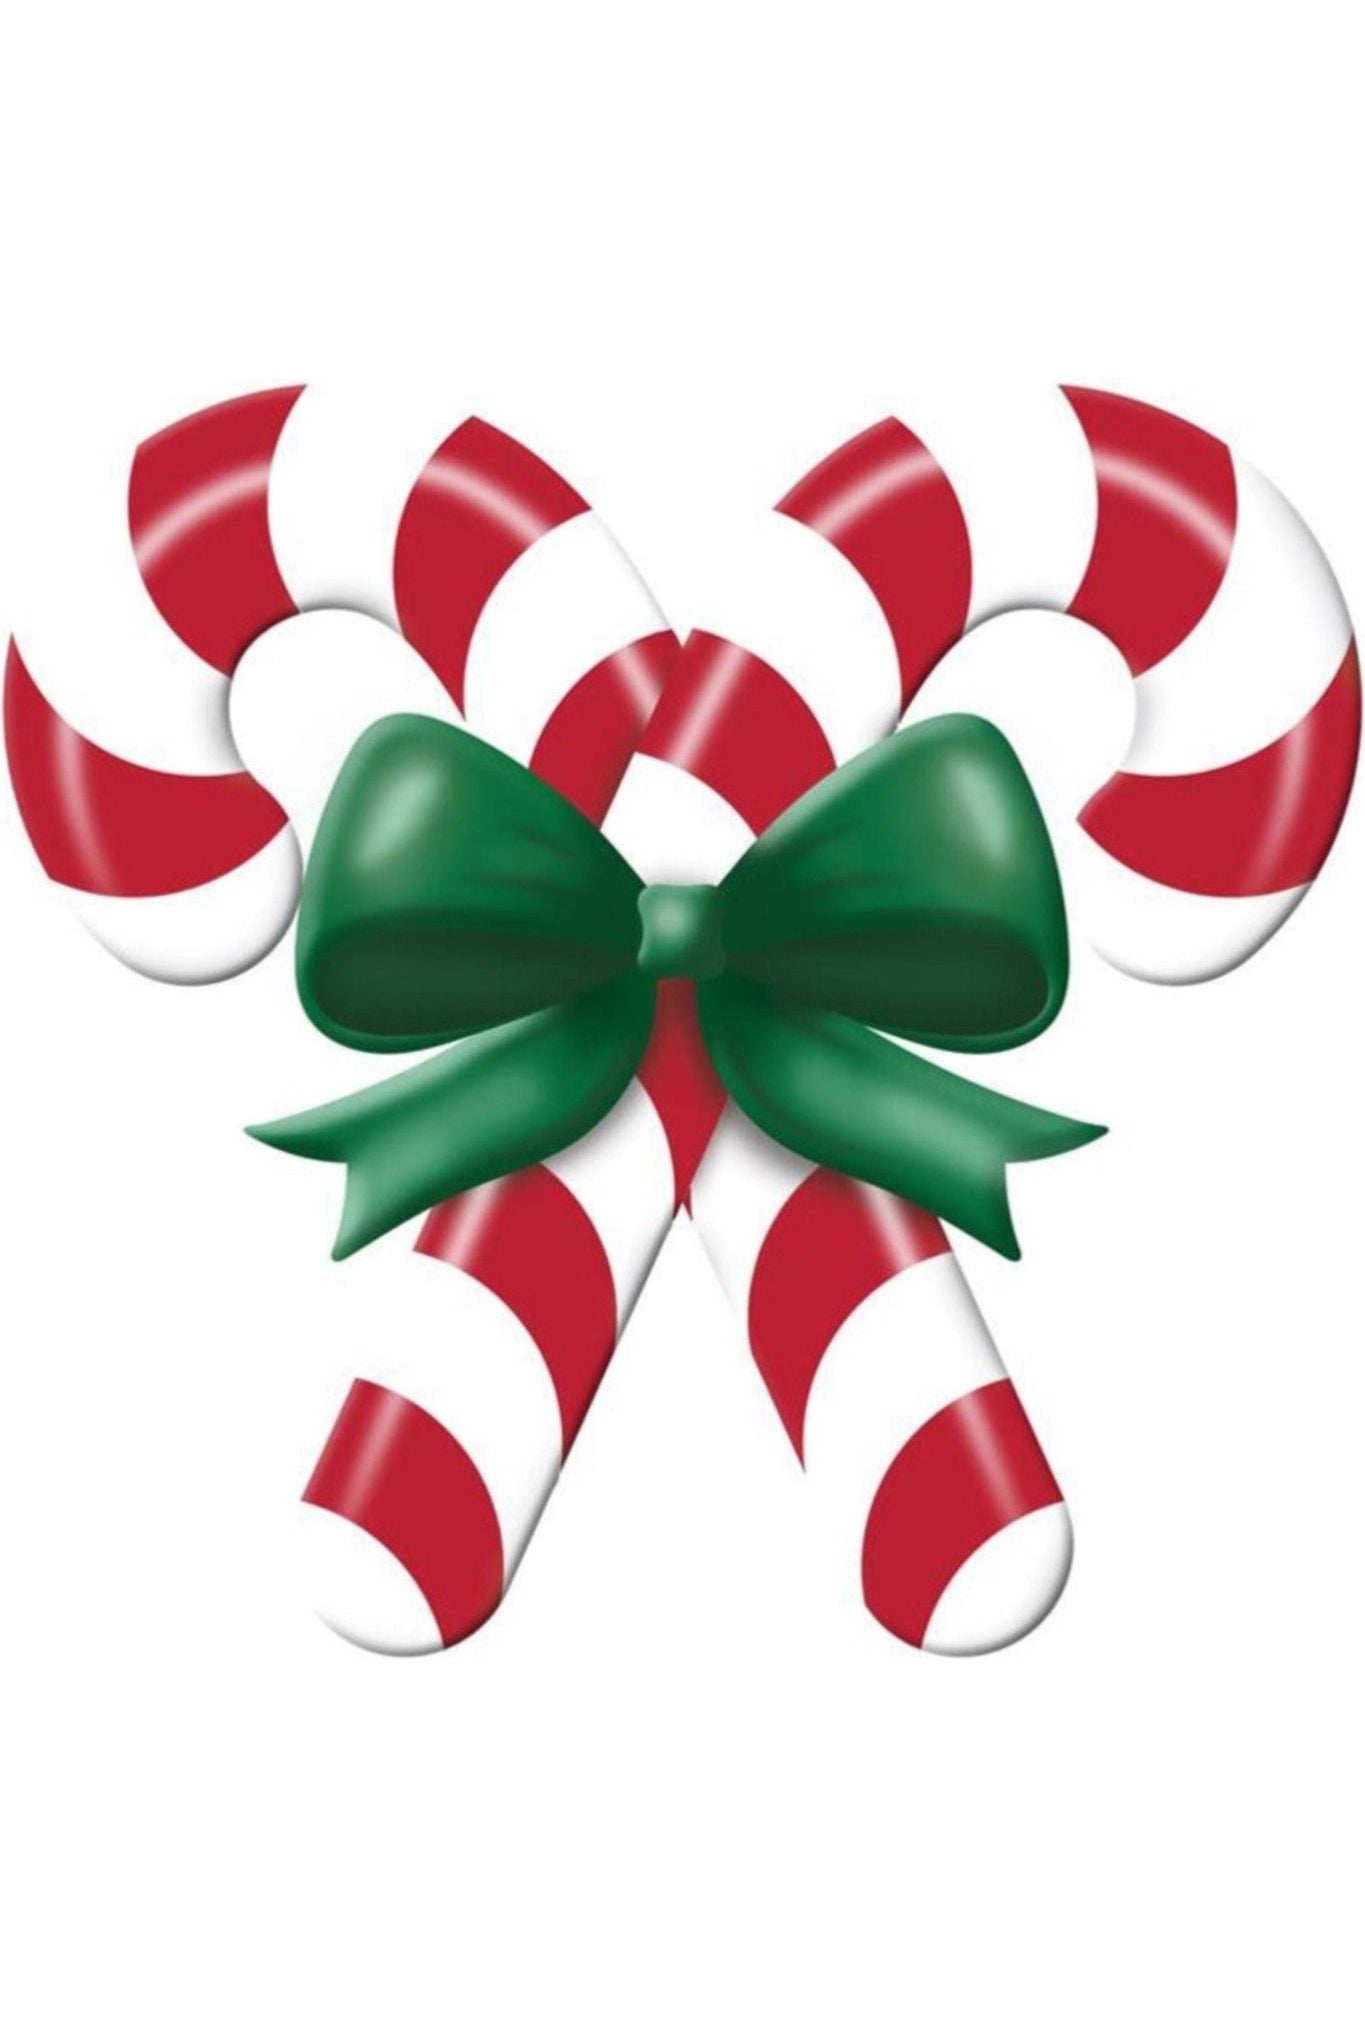 Shop For 13" Metal Embossed Candy Canes: Red/White MD136594